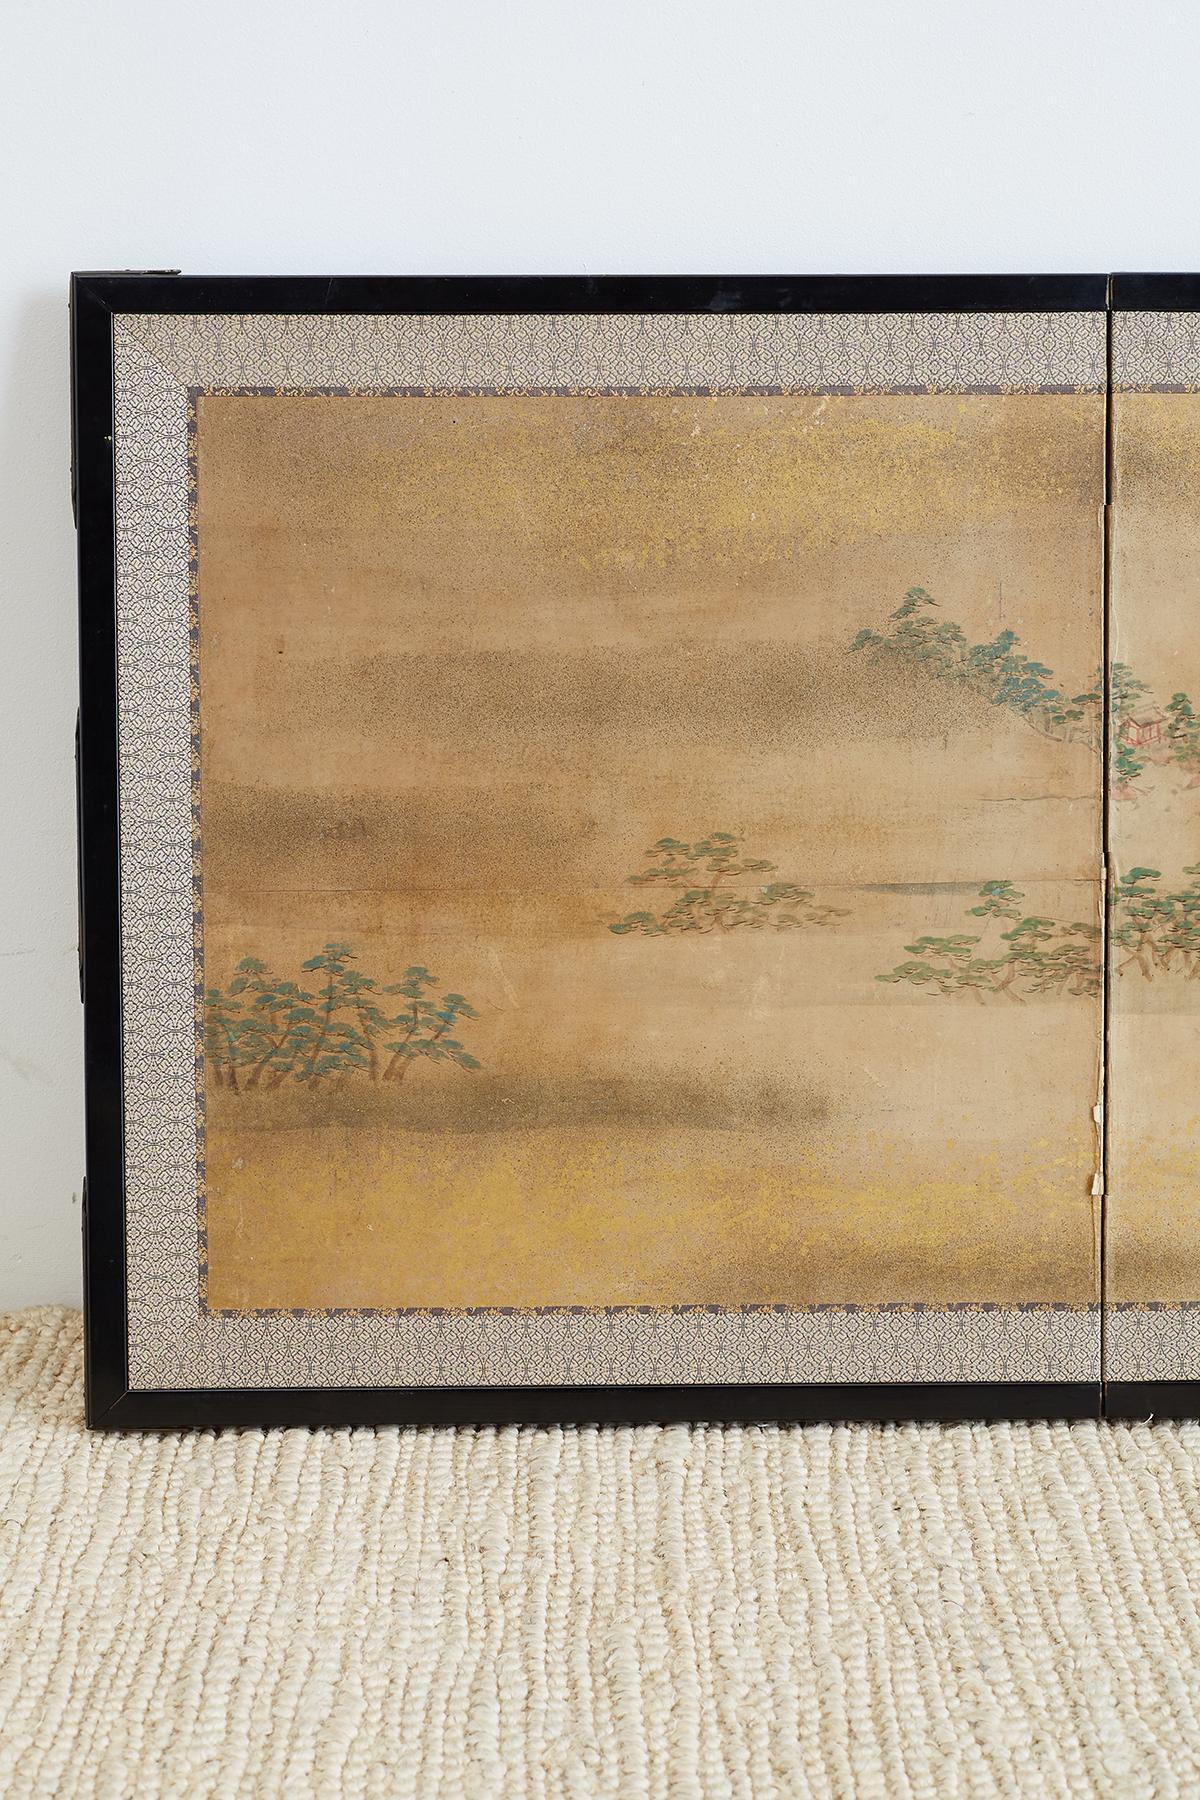 Diminutive Japanese late Meiji period two-panel landscape screen. Featuring a small village with pagoda roofs hidden in green pine trees. The scene is decorated with gilt specks on top and bottom. Probably cut down from a larger screen at some point